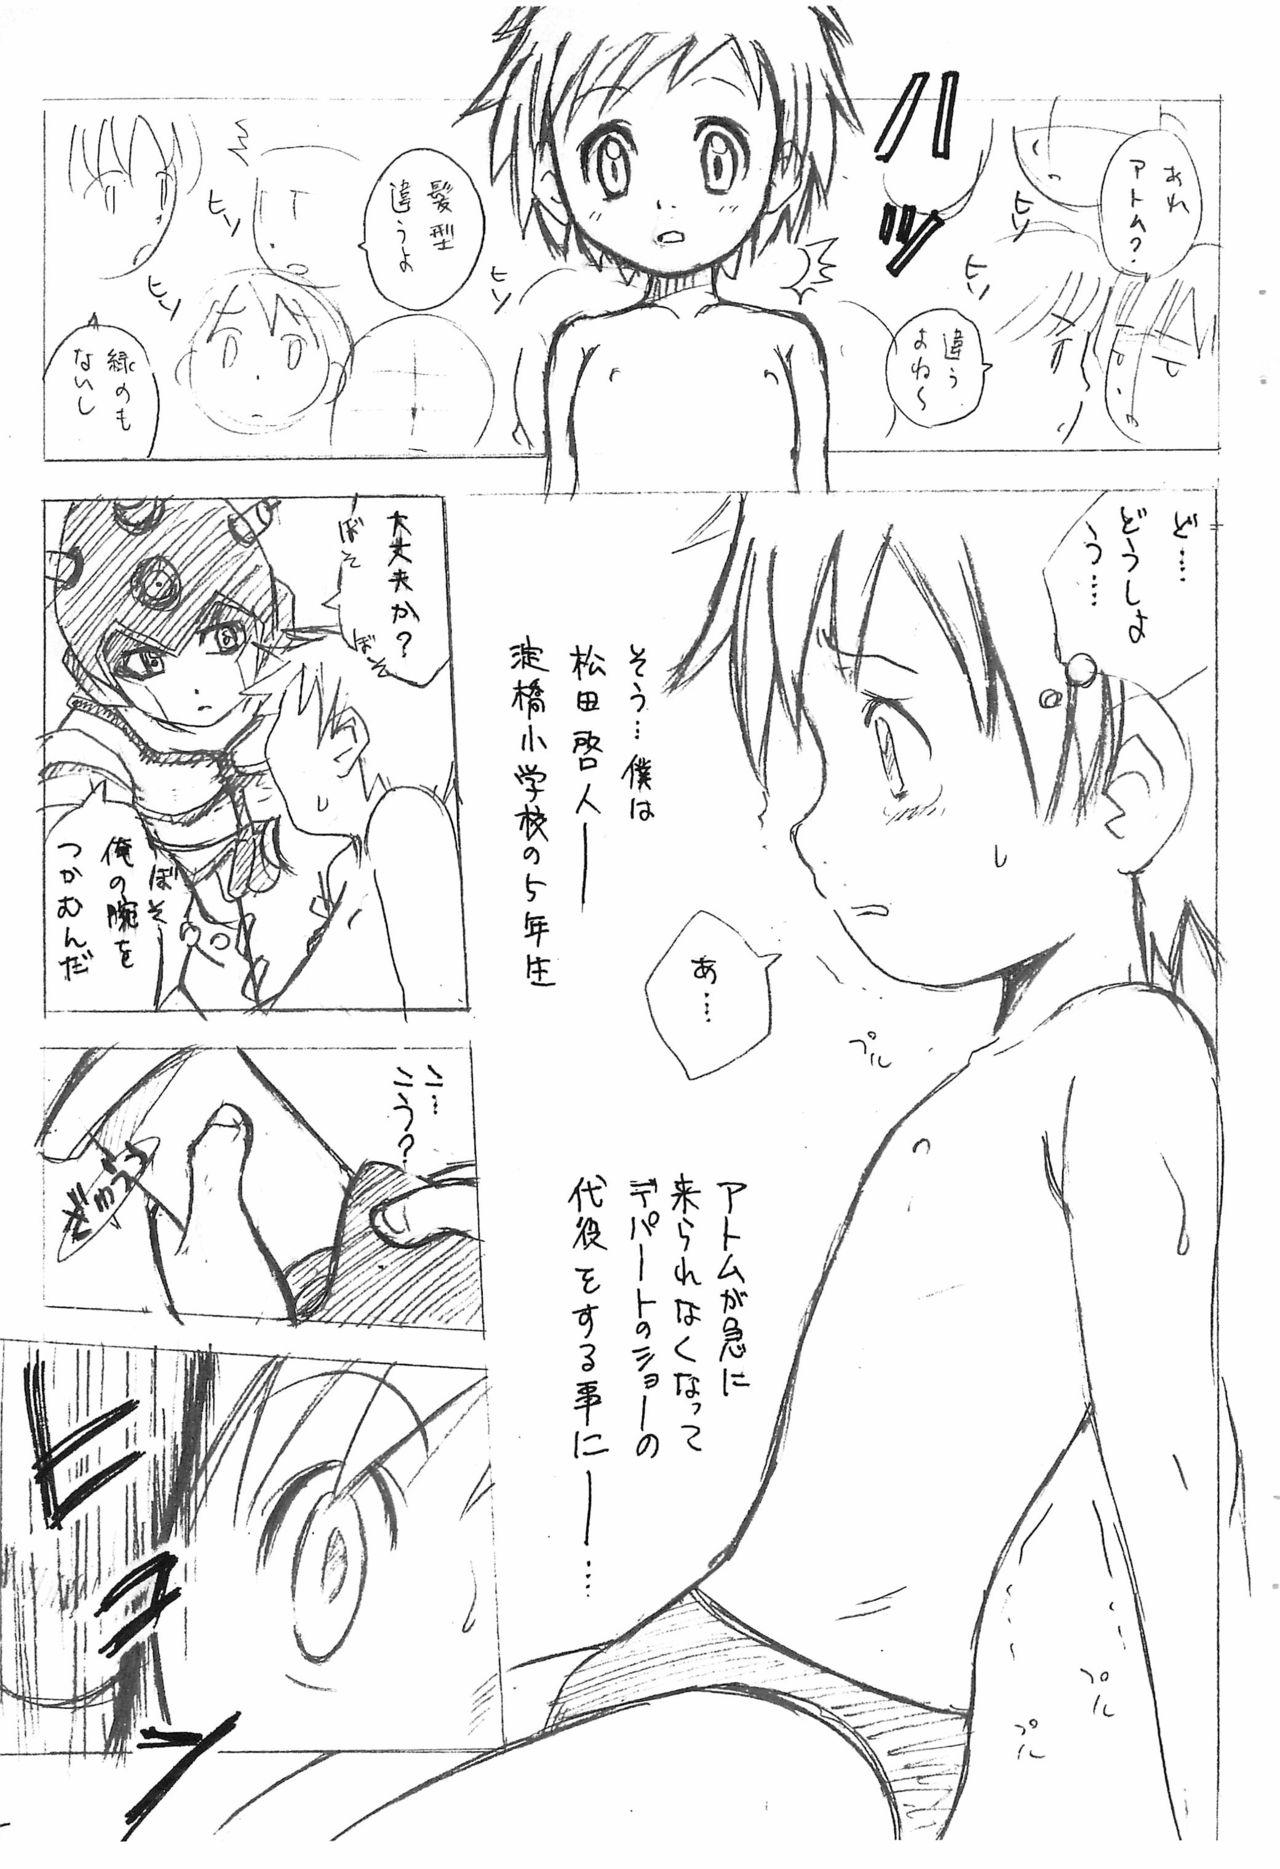 Clothed Tetsuwan Takato - Digimon tamers Astro boy Beurette - Page 5